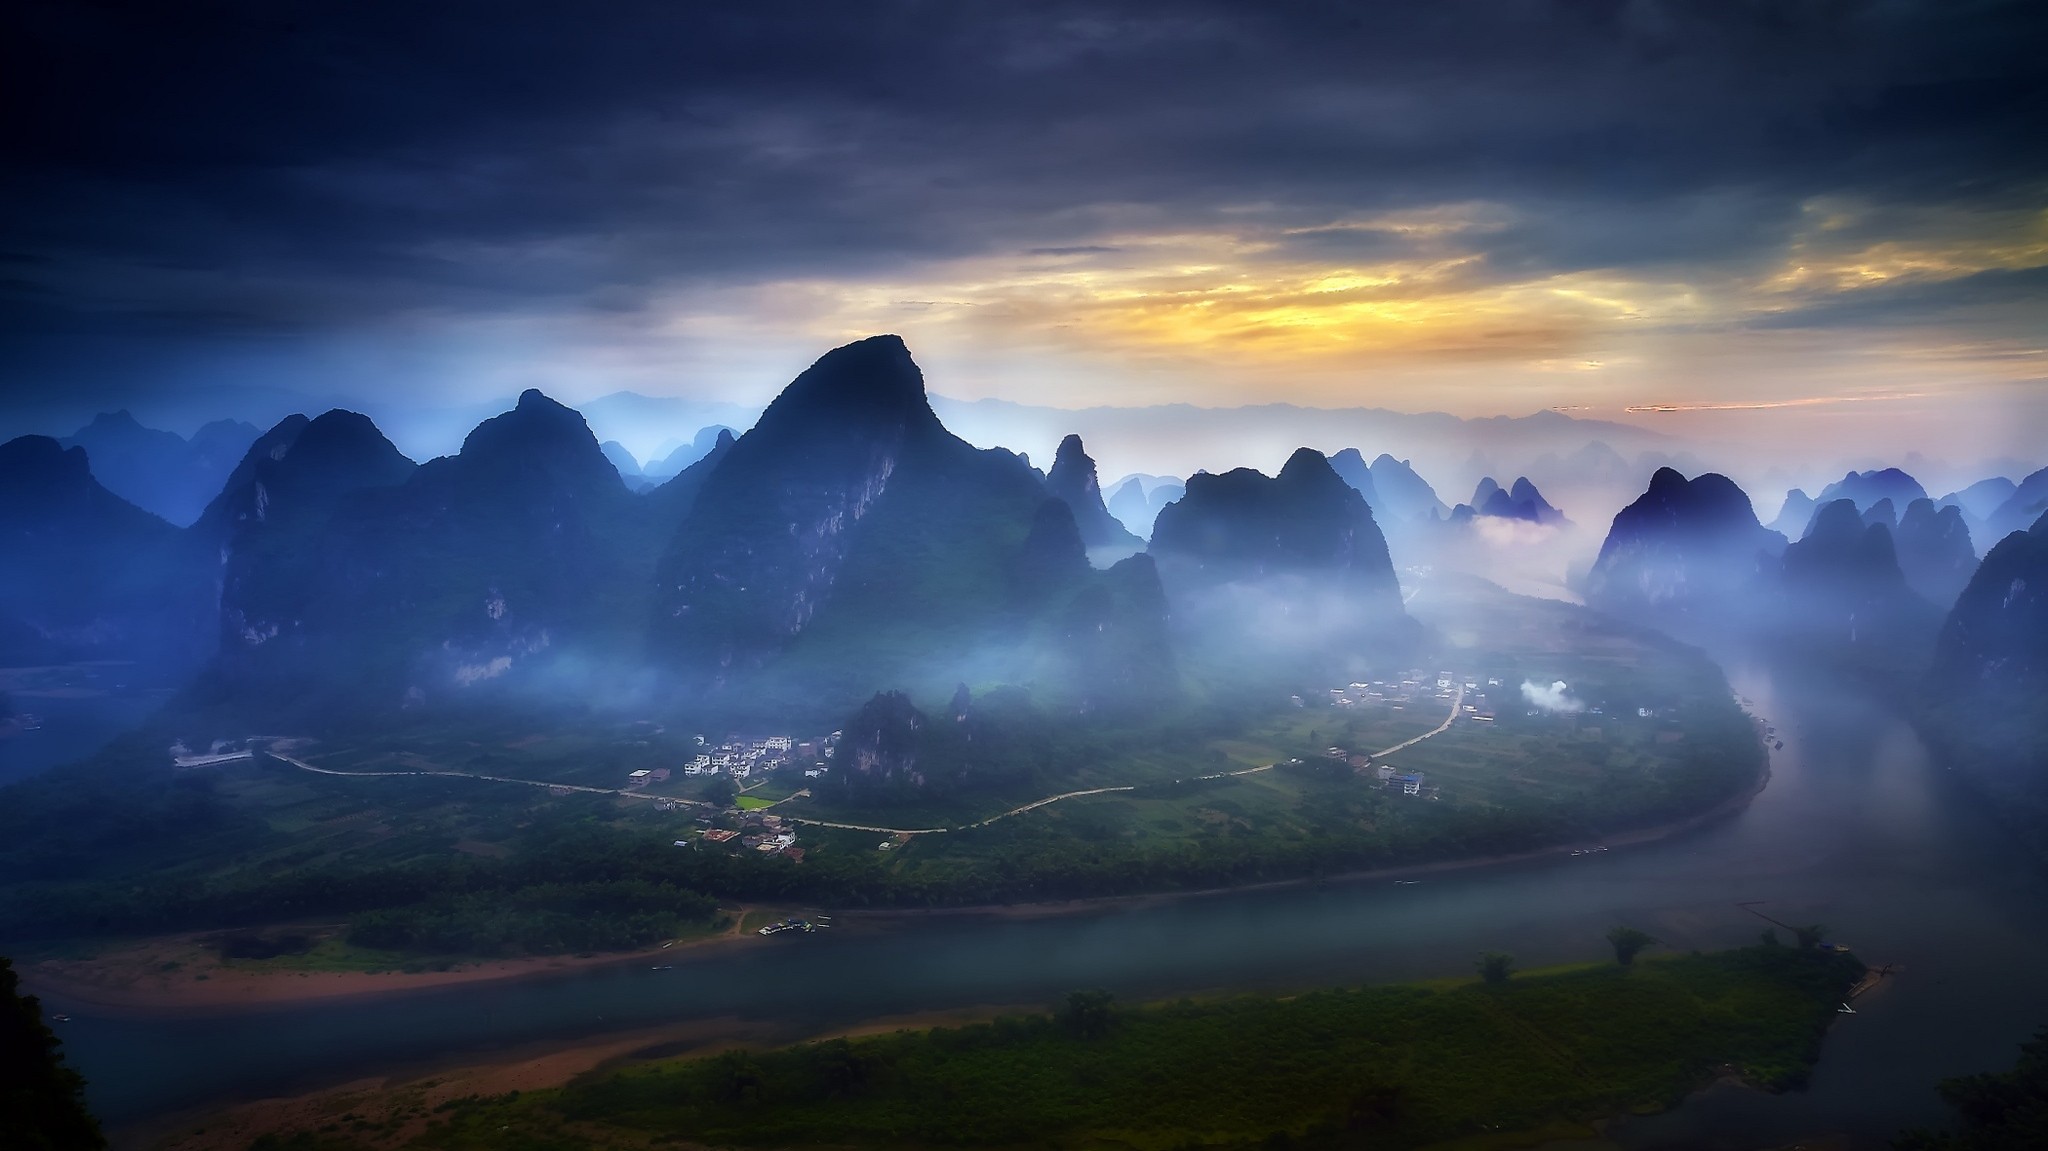 General 2048x1151 nature landscape mountains river mist road sky town field blue Guilin